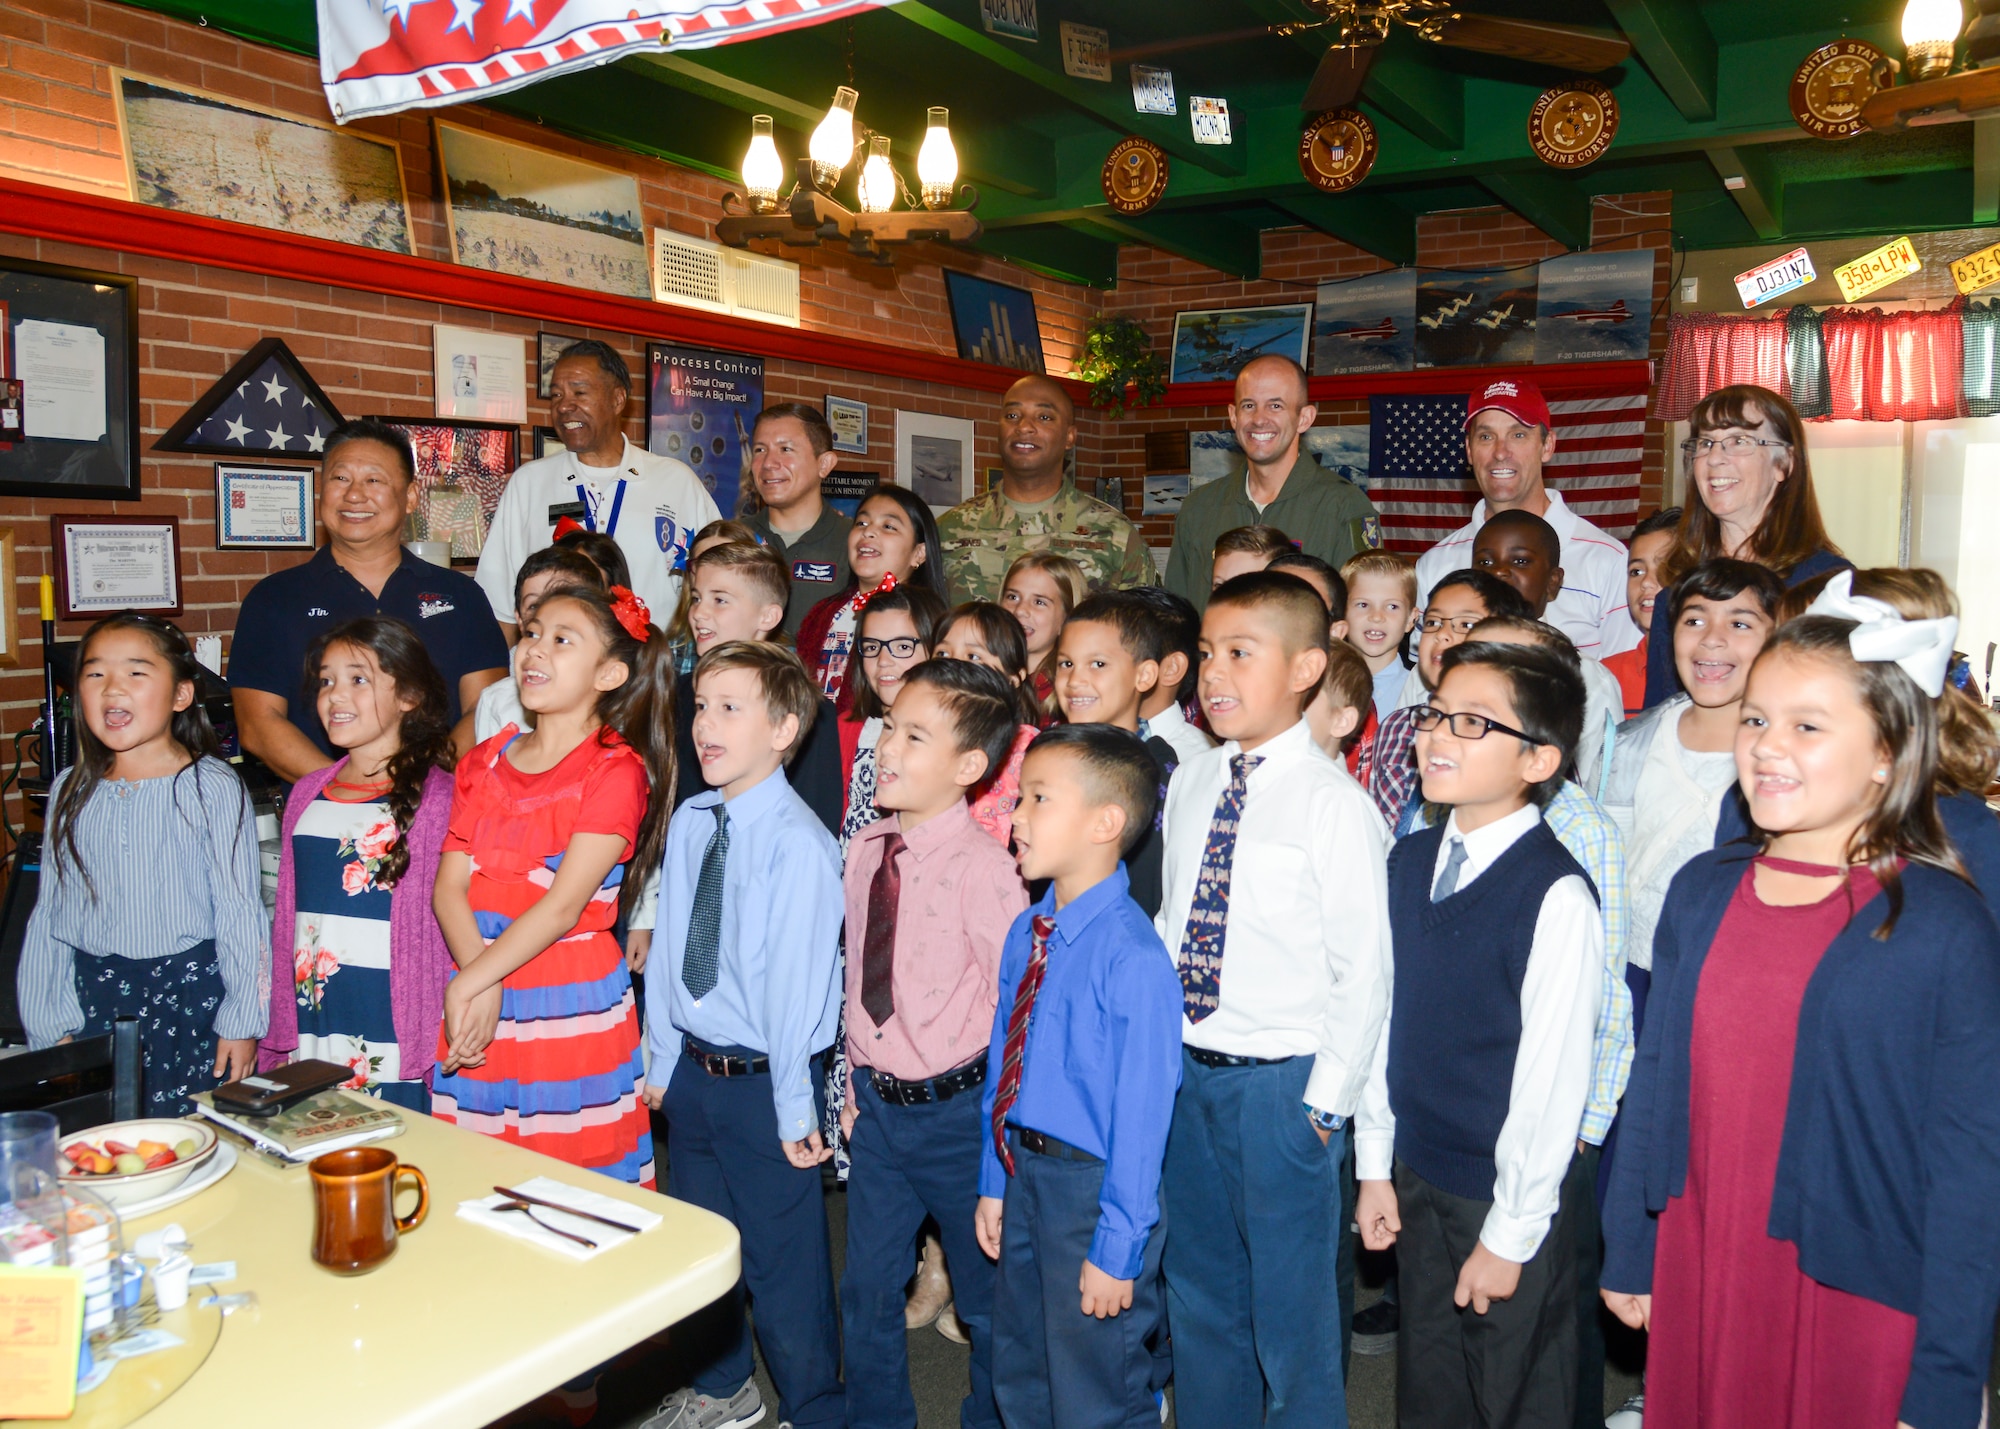 Brig. Gen. E. John Teichert and Command Chief Master Sgt. Roosevelt Jones, 412th Test Wing commander and command chief master sergeant, pose for a photo with children from Lancaster Baptist School and U.S. Rep. Steve Knight photo during a Coffee4Vets gathering at Crazy Otto’s Diner in Lancaster, California, Nov. 6. Coffee4Vets meet every Tuesday at the restaurant for fellowship and camaraderie. (U.S. Air Force photo by Giancarlo Casem)